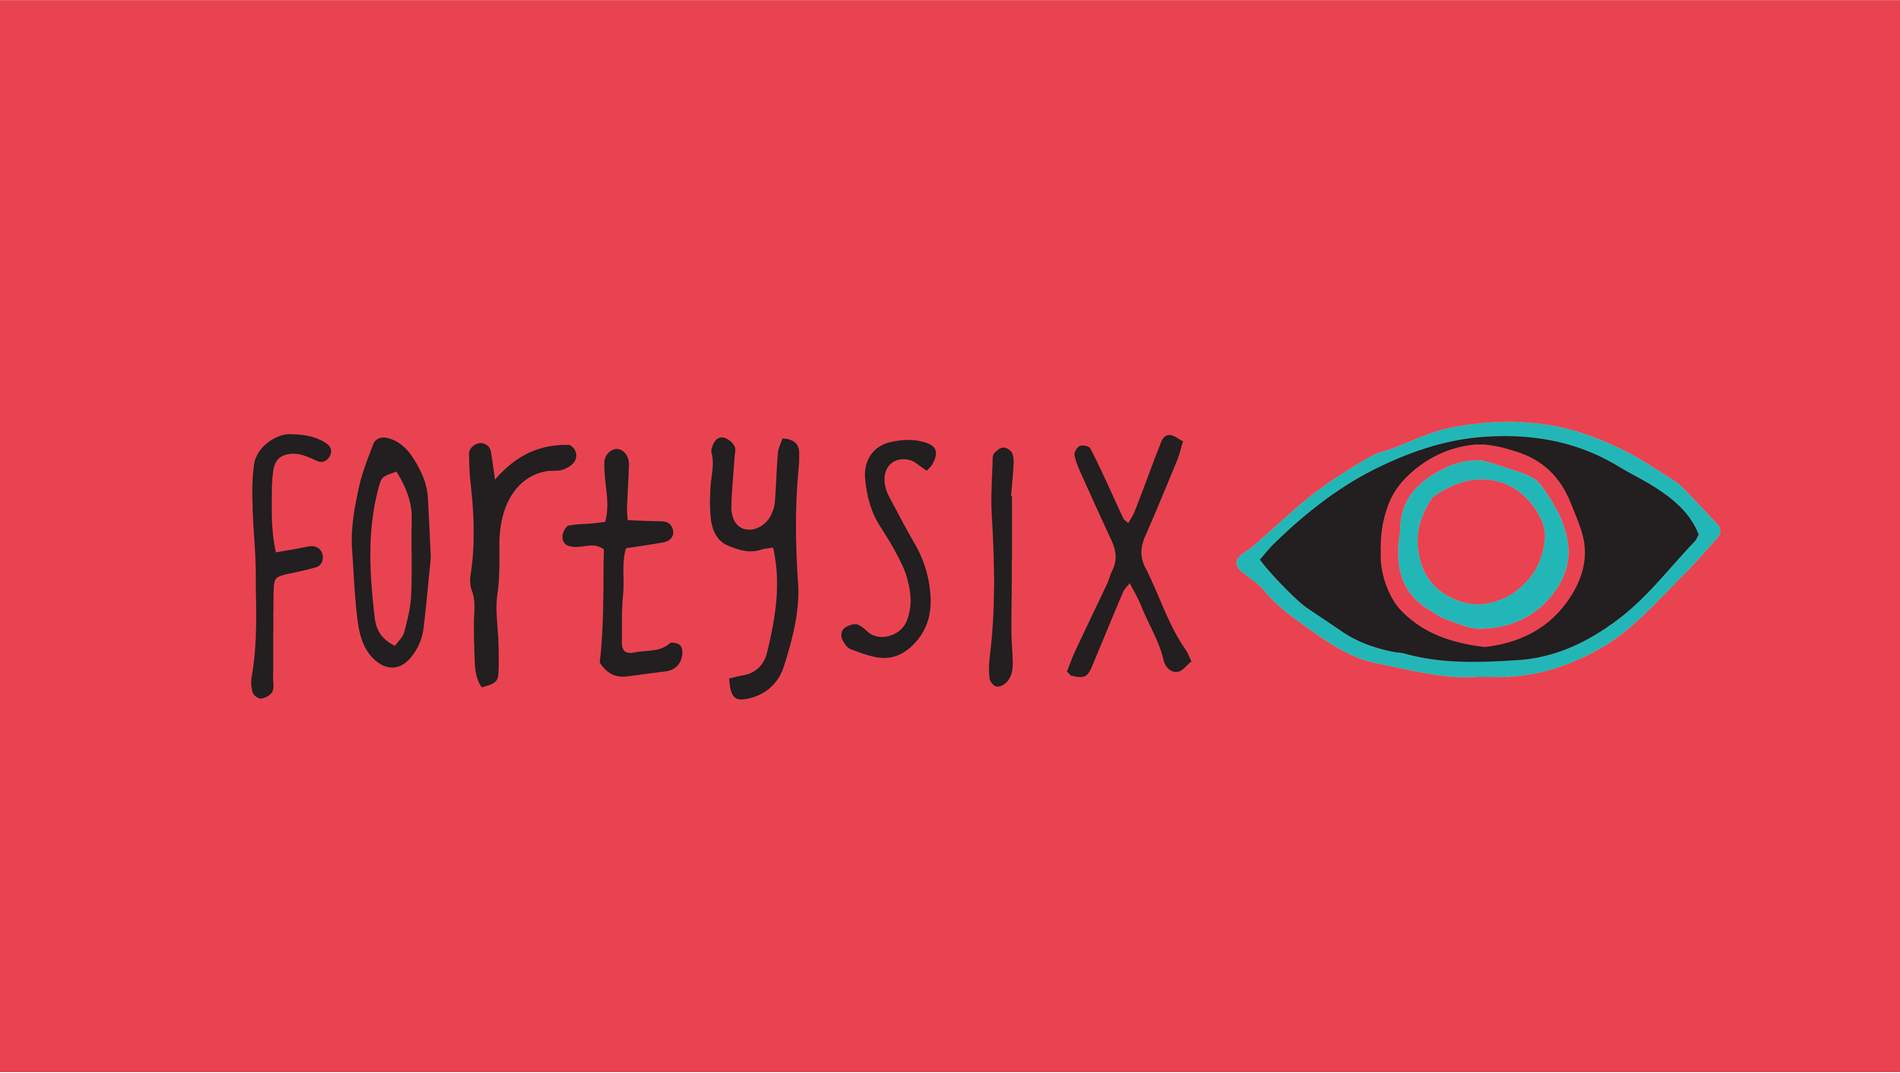 Fortysix logo, A Curate's Egg